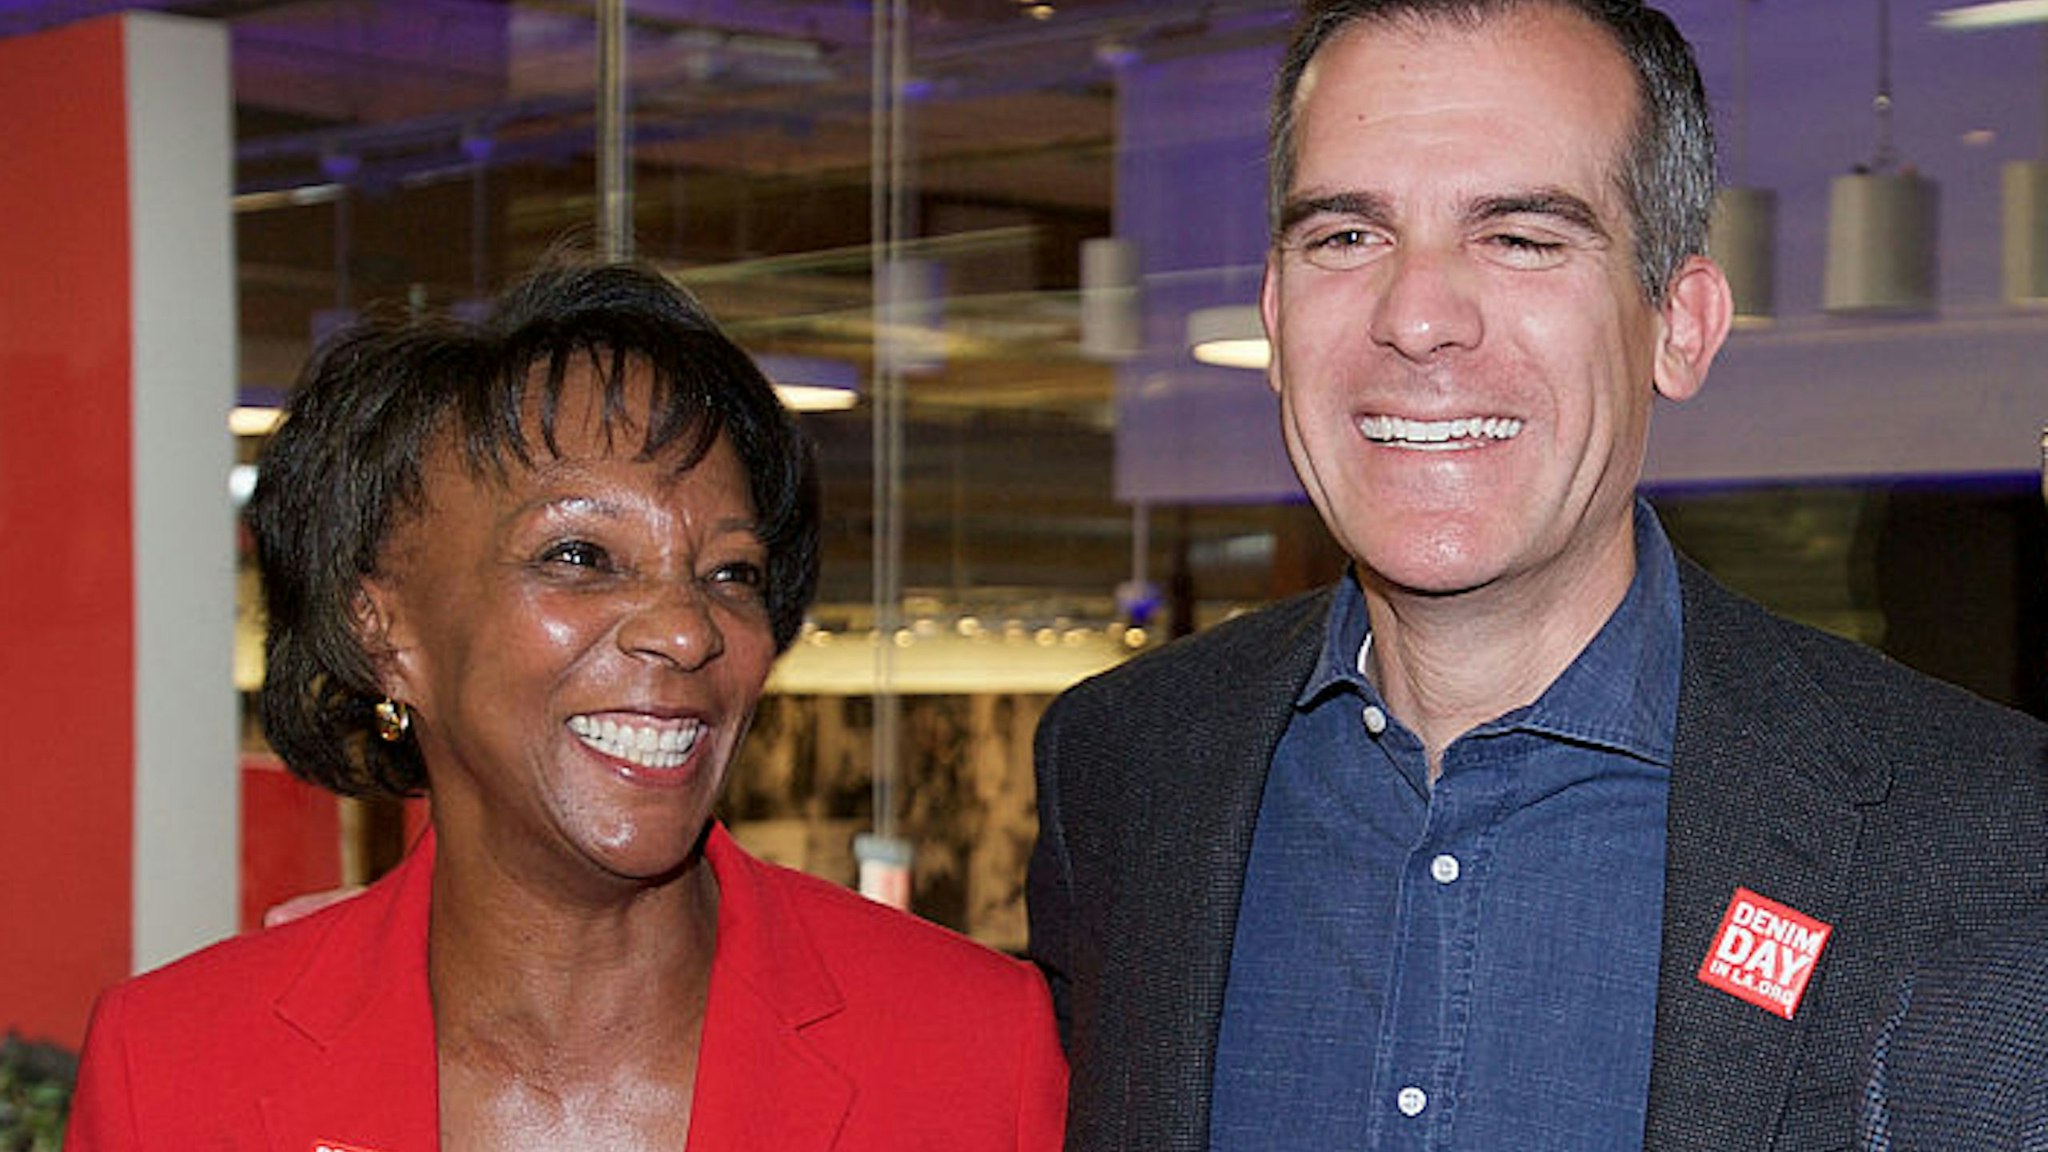 Los Angeles Mayor Eric Garcetti with District Attorney Jackie Lacey. GUESS Headquarters on April 29, 2015 in Los Angeles, California.